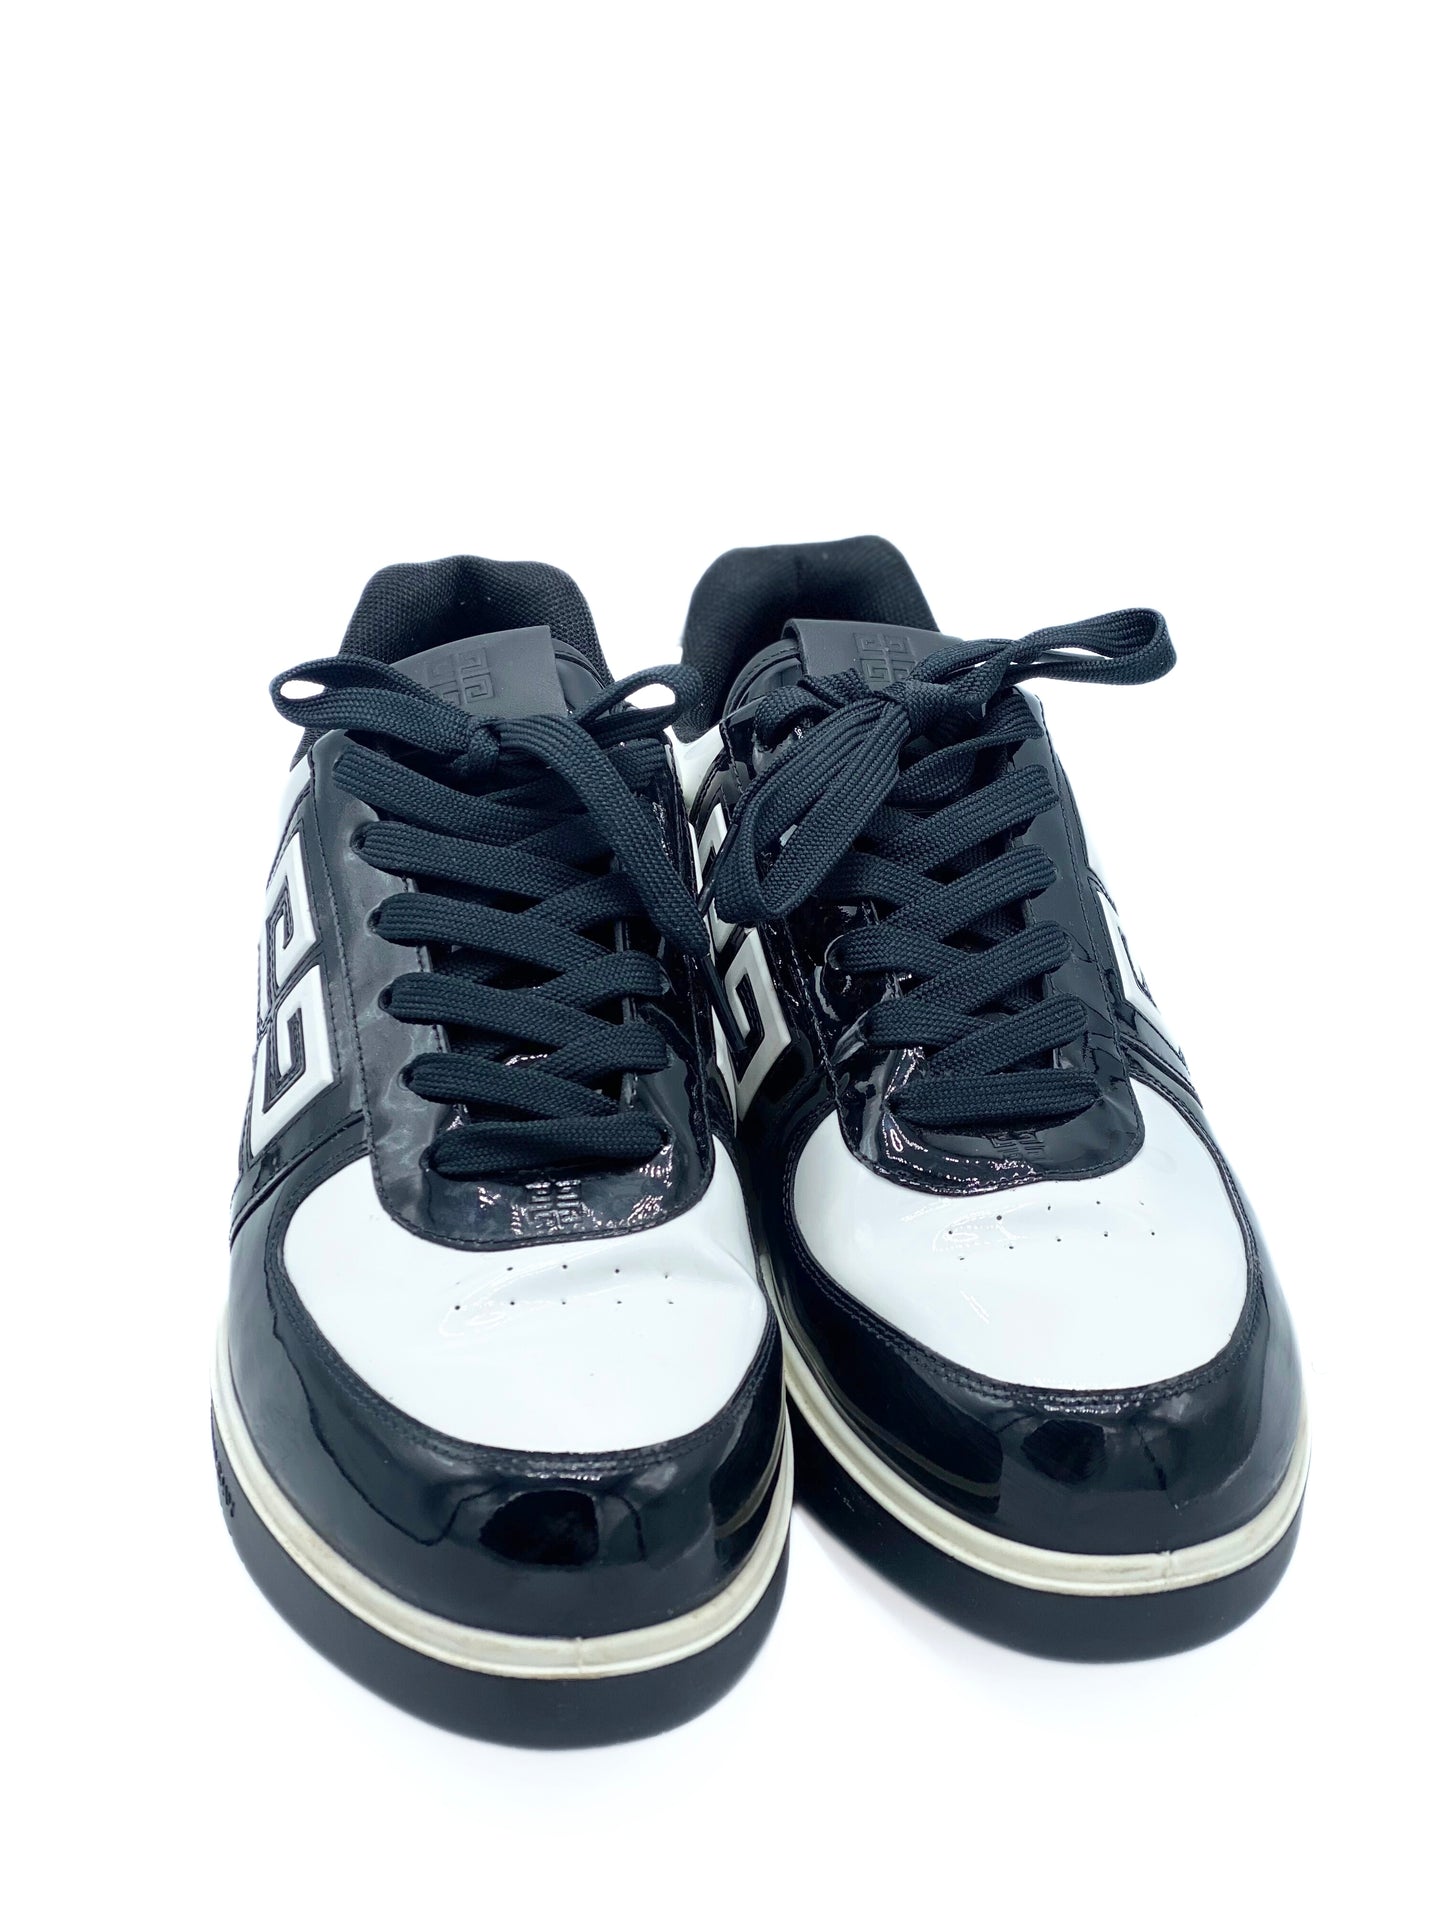 Champion Givenchy G4 Low Black and White (EU 44)